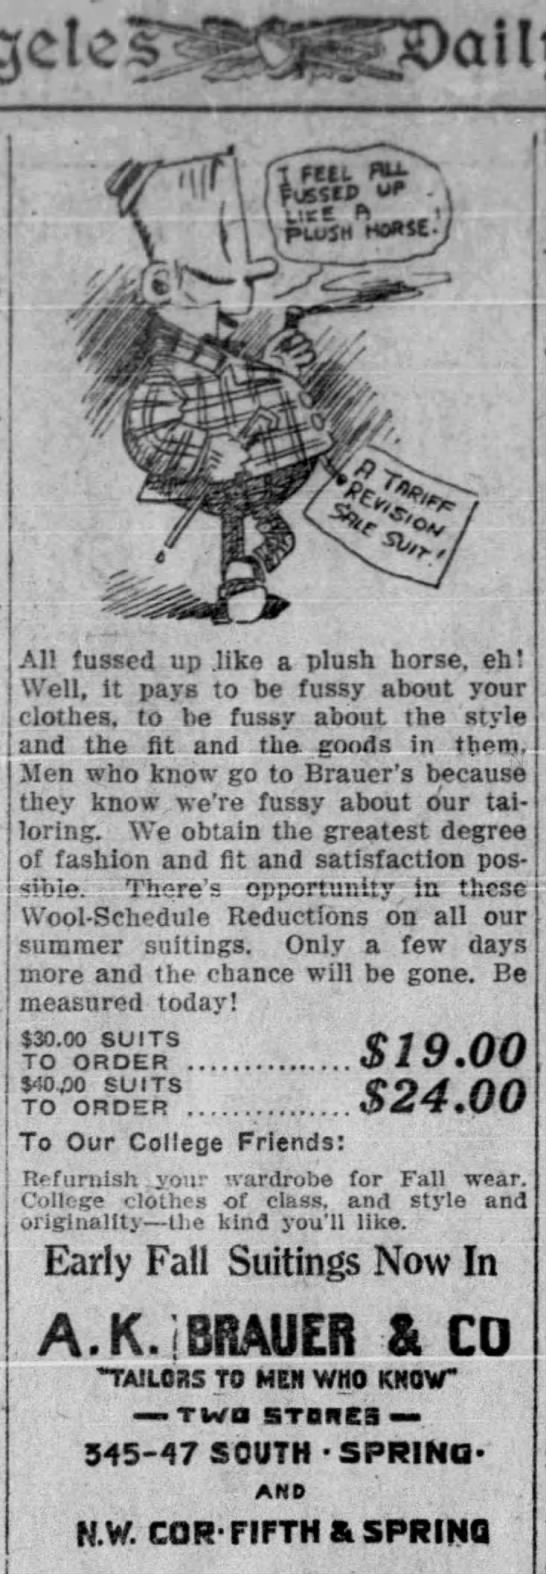 "Like a plush horse" (1911). A later term is "Mrs. Astor's plush horse." - 